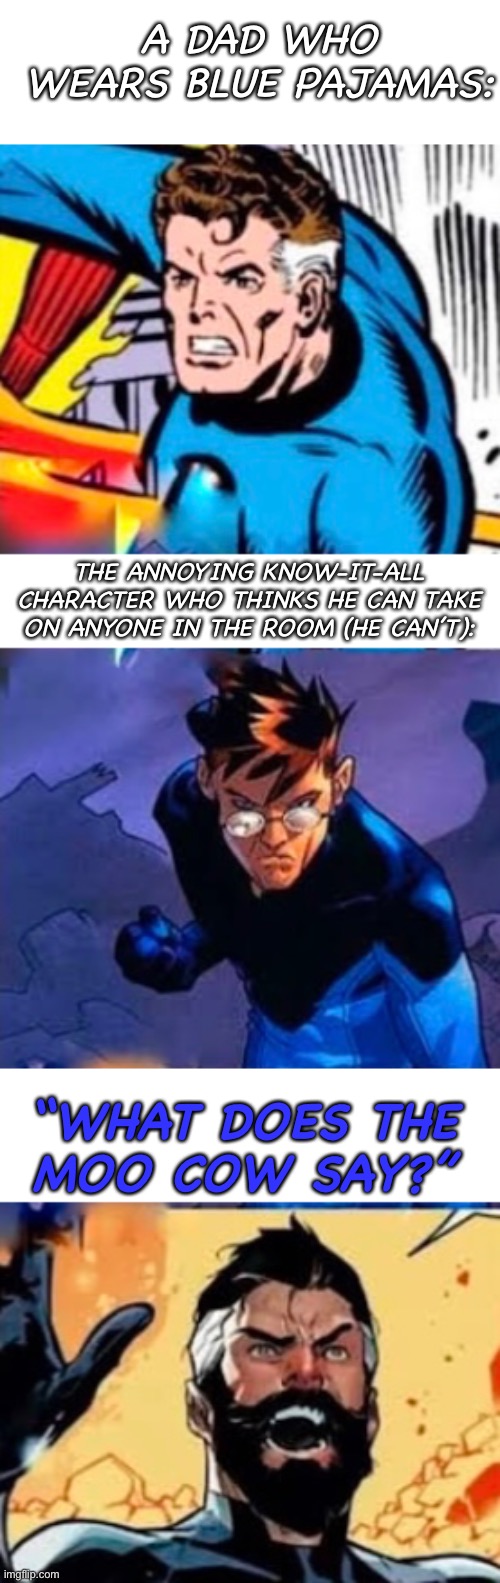 Mr Fantastic has 3 emotions: | A DAD WHO WEARS BLUE PAJAMAS:; THE ANNOYING KNOW-IT-ALL CHARACTER WHO THINKS HE CAN TAKE ON ANYONE IN THE ROOM (HE CAN’T):; “WHAT DOES THE
MOO COW SAY?” | image tagged in mr fantastic,fantastic four,fantastic 4,reed richards,what does the moo cow say,comics | made w/ Imgflip meme maker